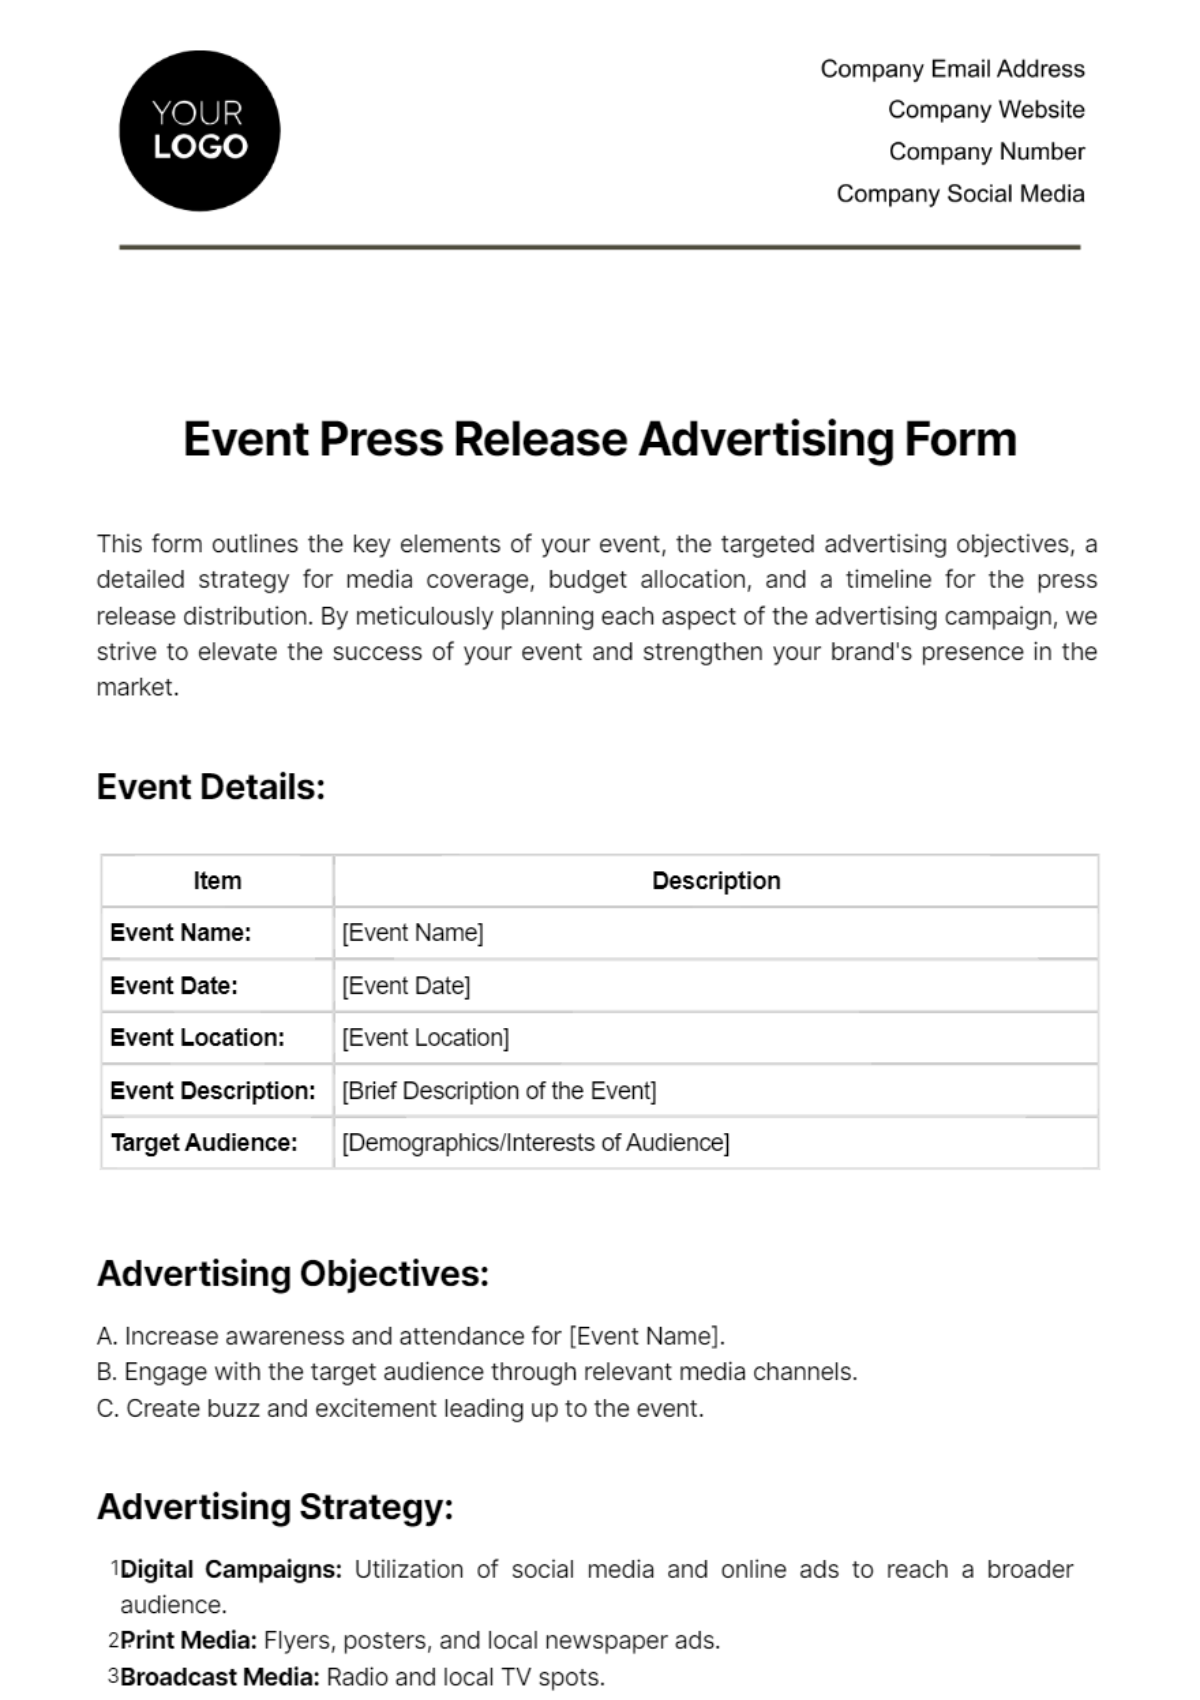 Event Press Release Advertising Form Template